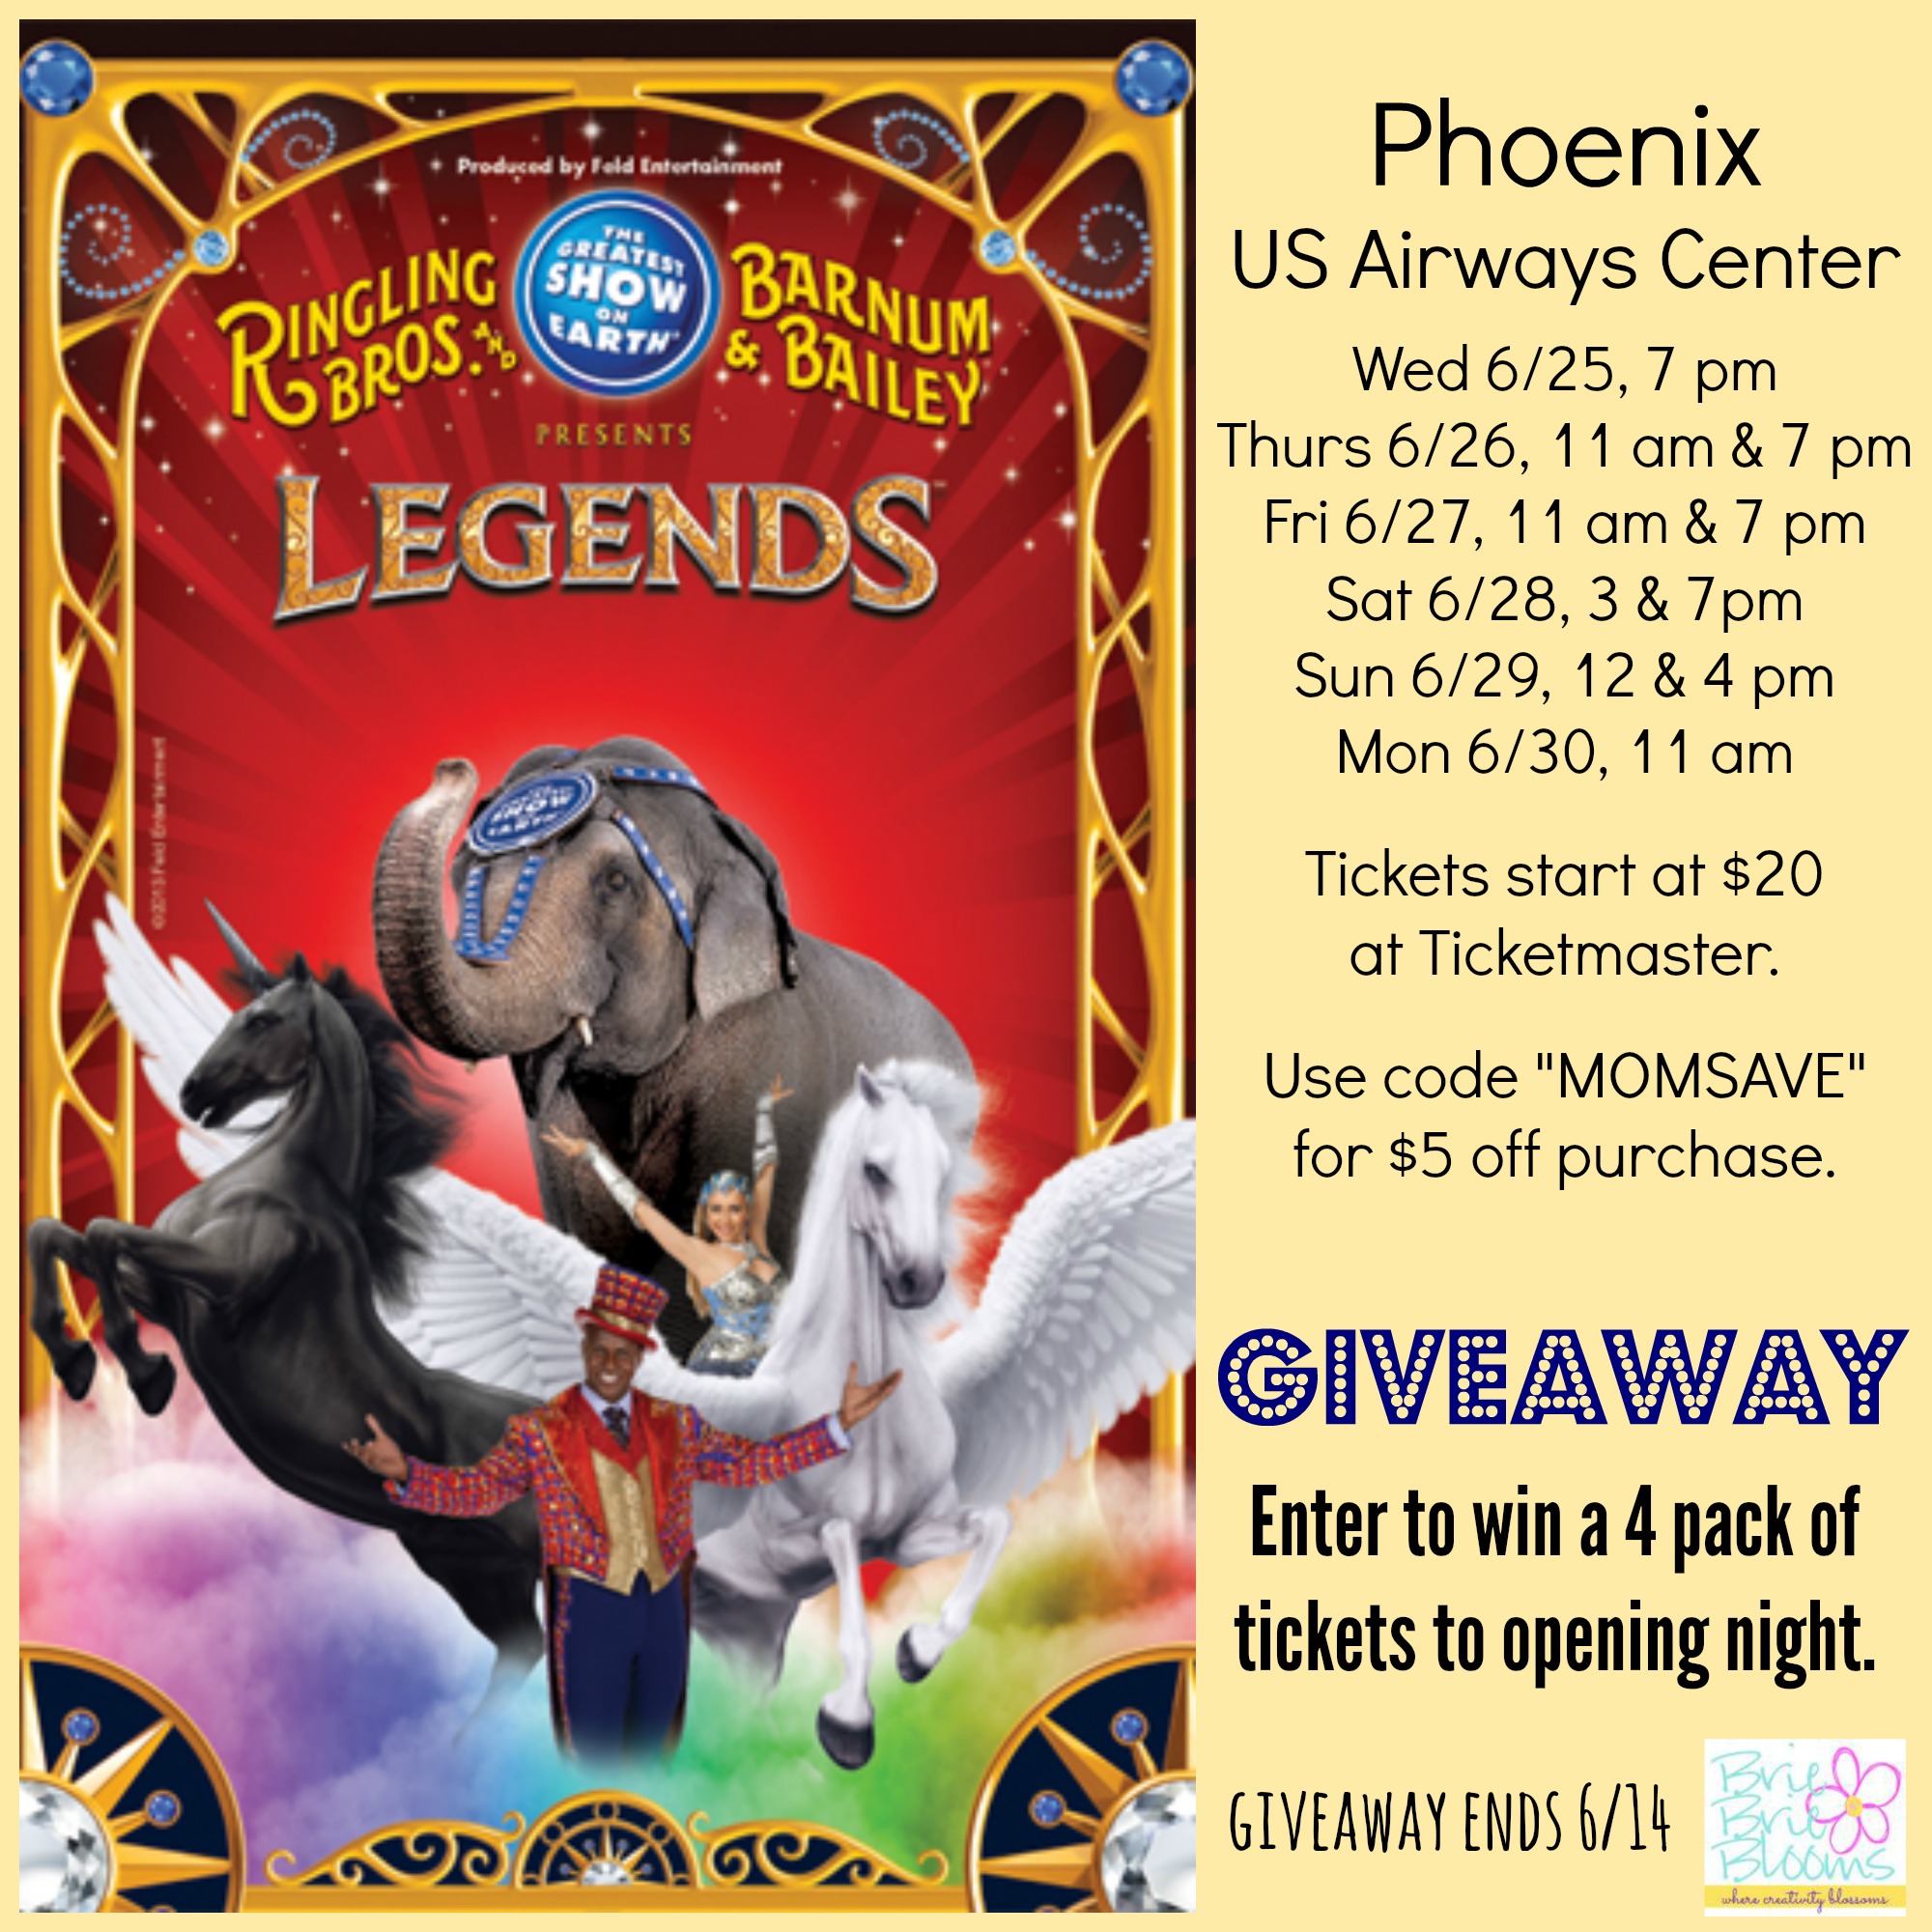 Ringling Bros. and Barnum & Bailey circus presents LEGENDS Phoenix ticket giveaway 2014